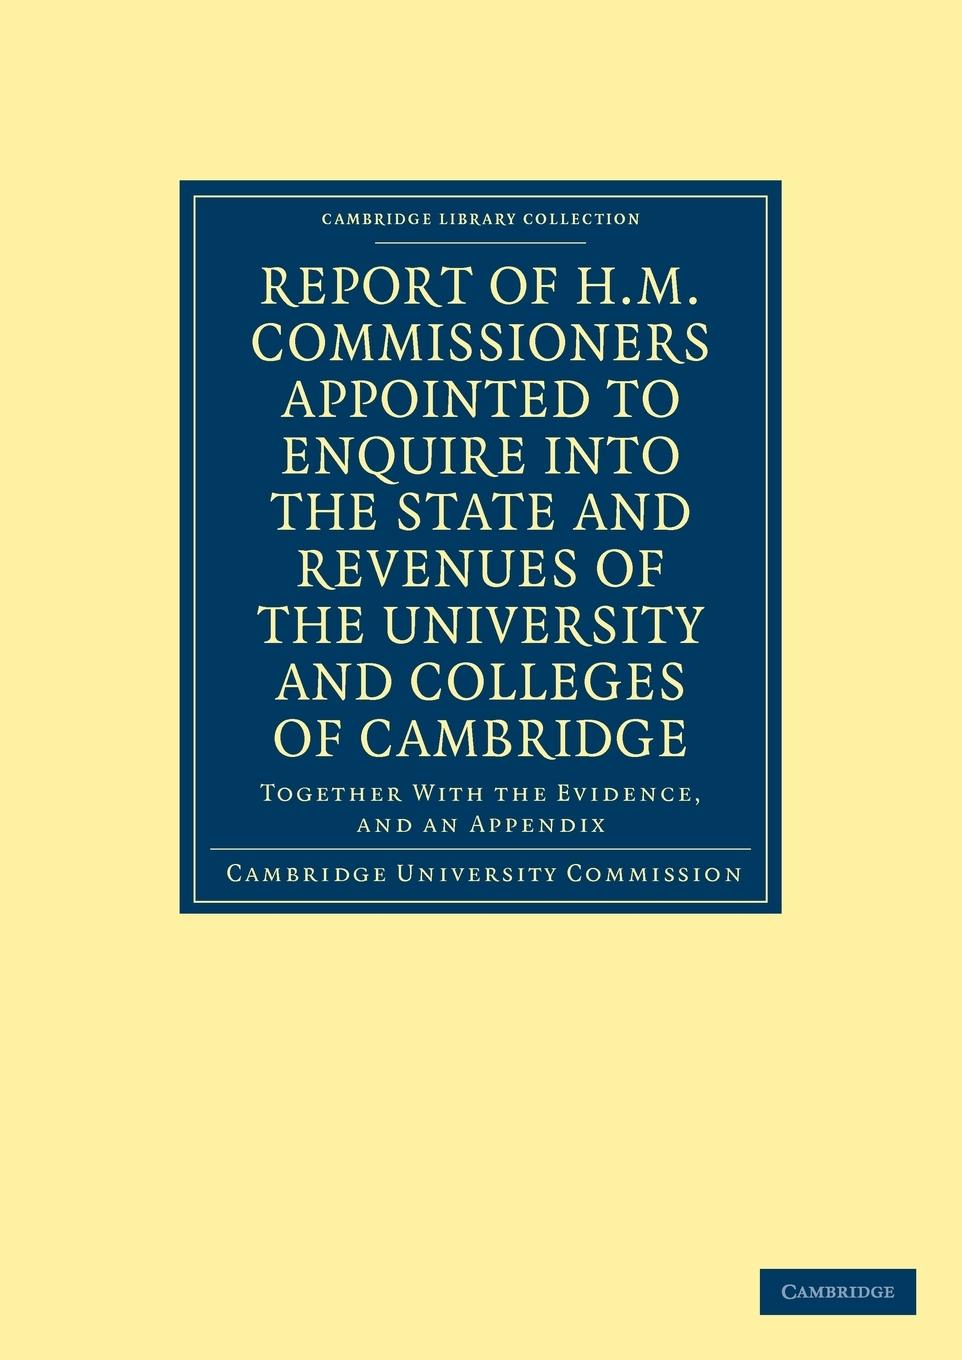 Report of H.M. Commissioners Appointed to Enquire Into the State and Revenues of the University and Colleges of Cambridge - Cambridge University Commission Cambridge, Cambridge University Commissi